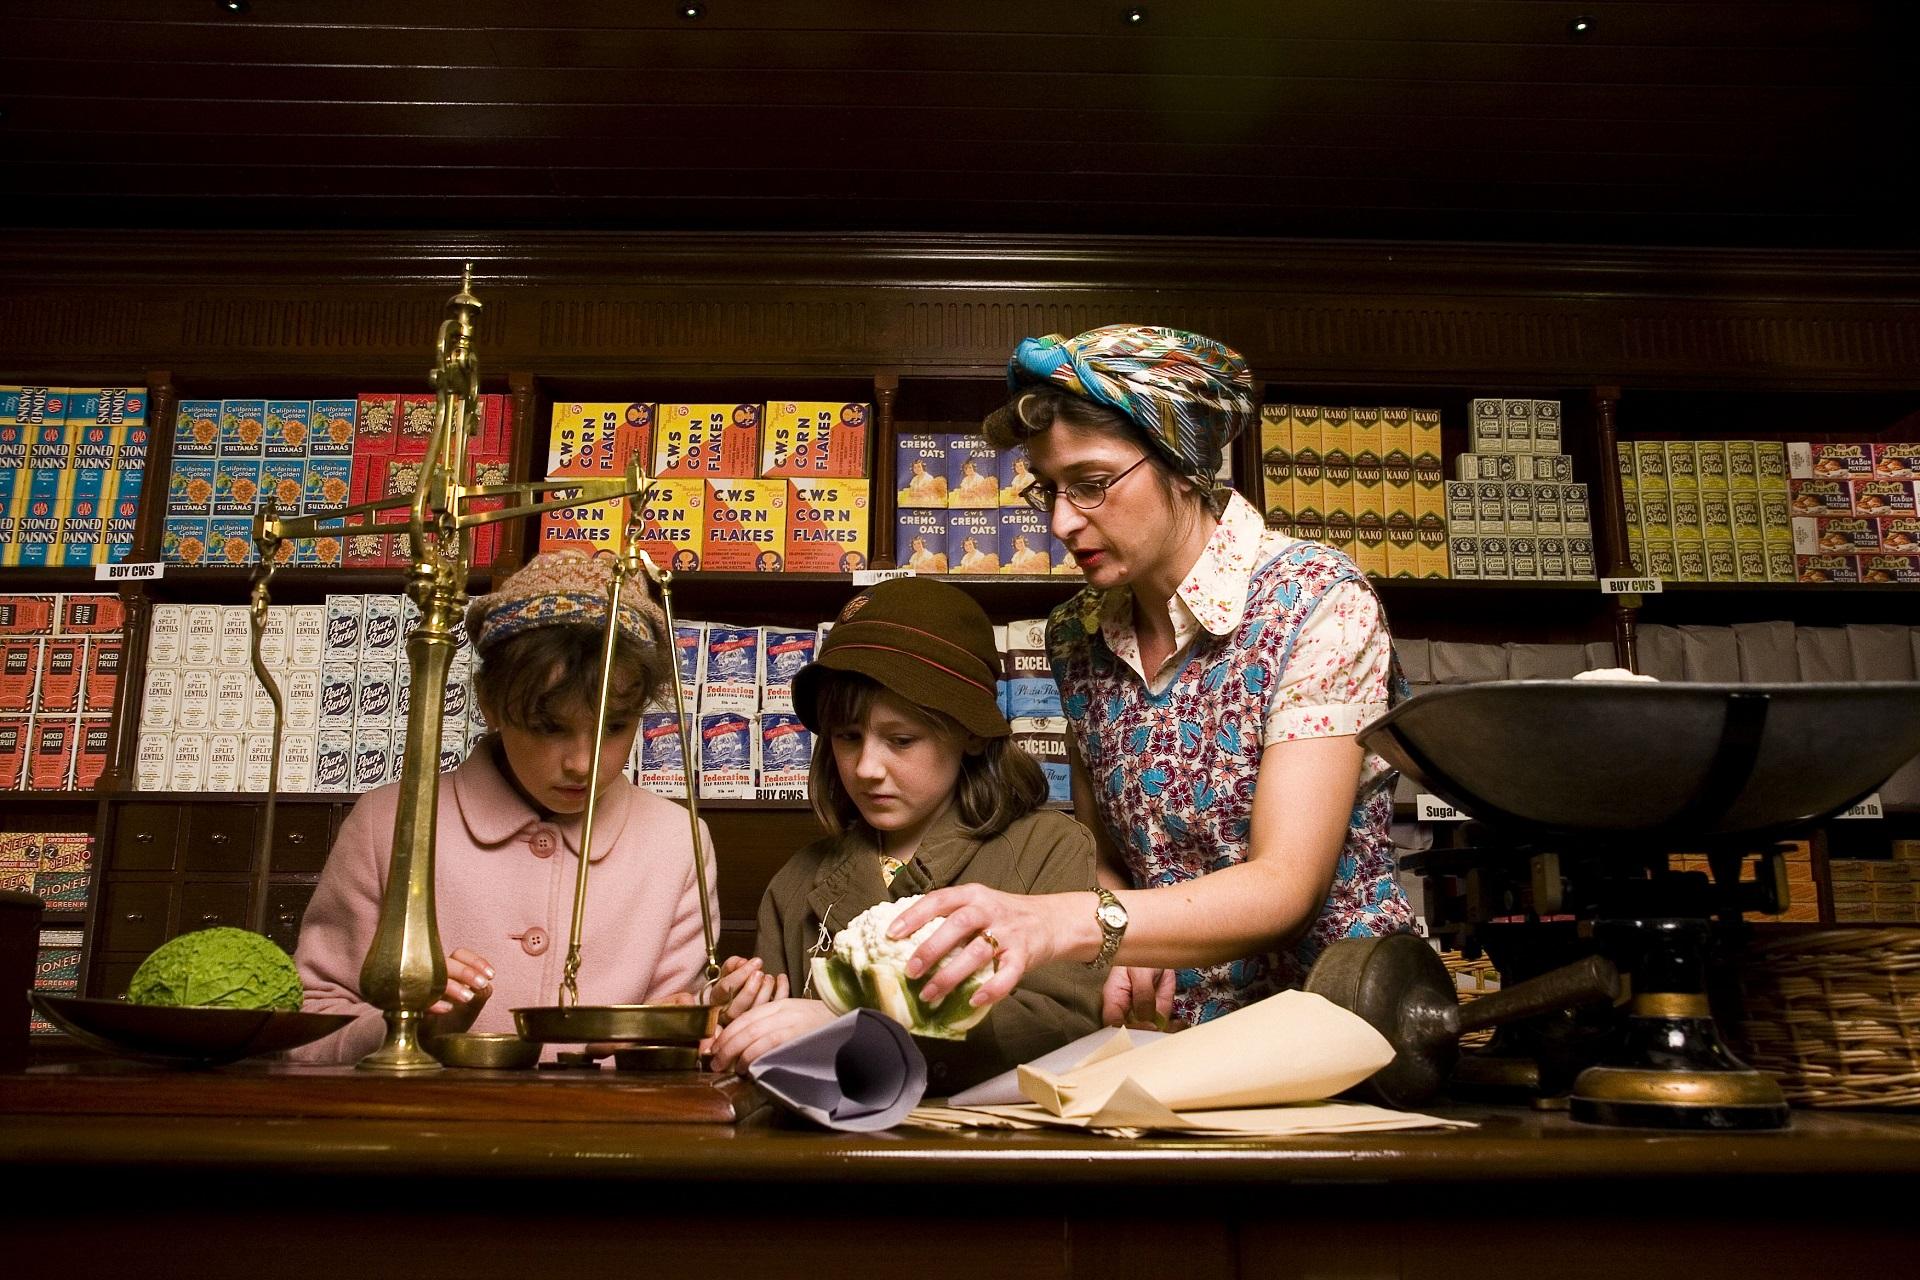 Two children and a woman dressed in 1940s clothing in a grocery shop.